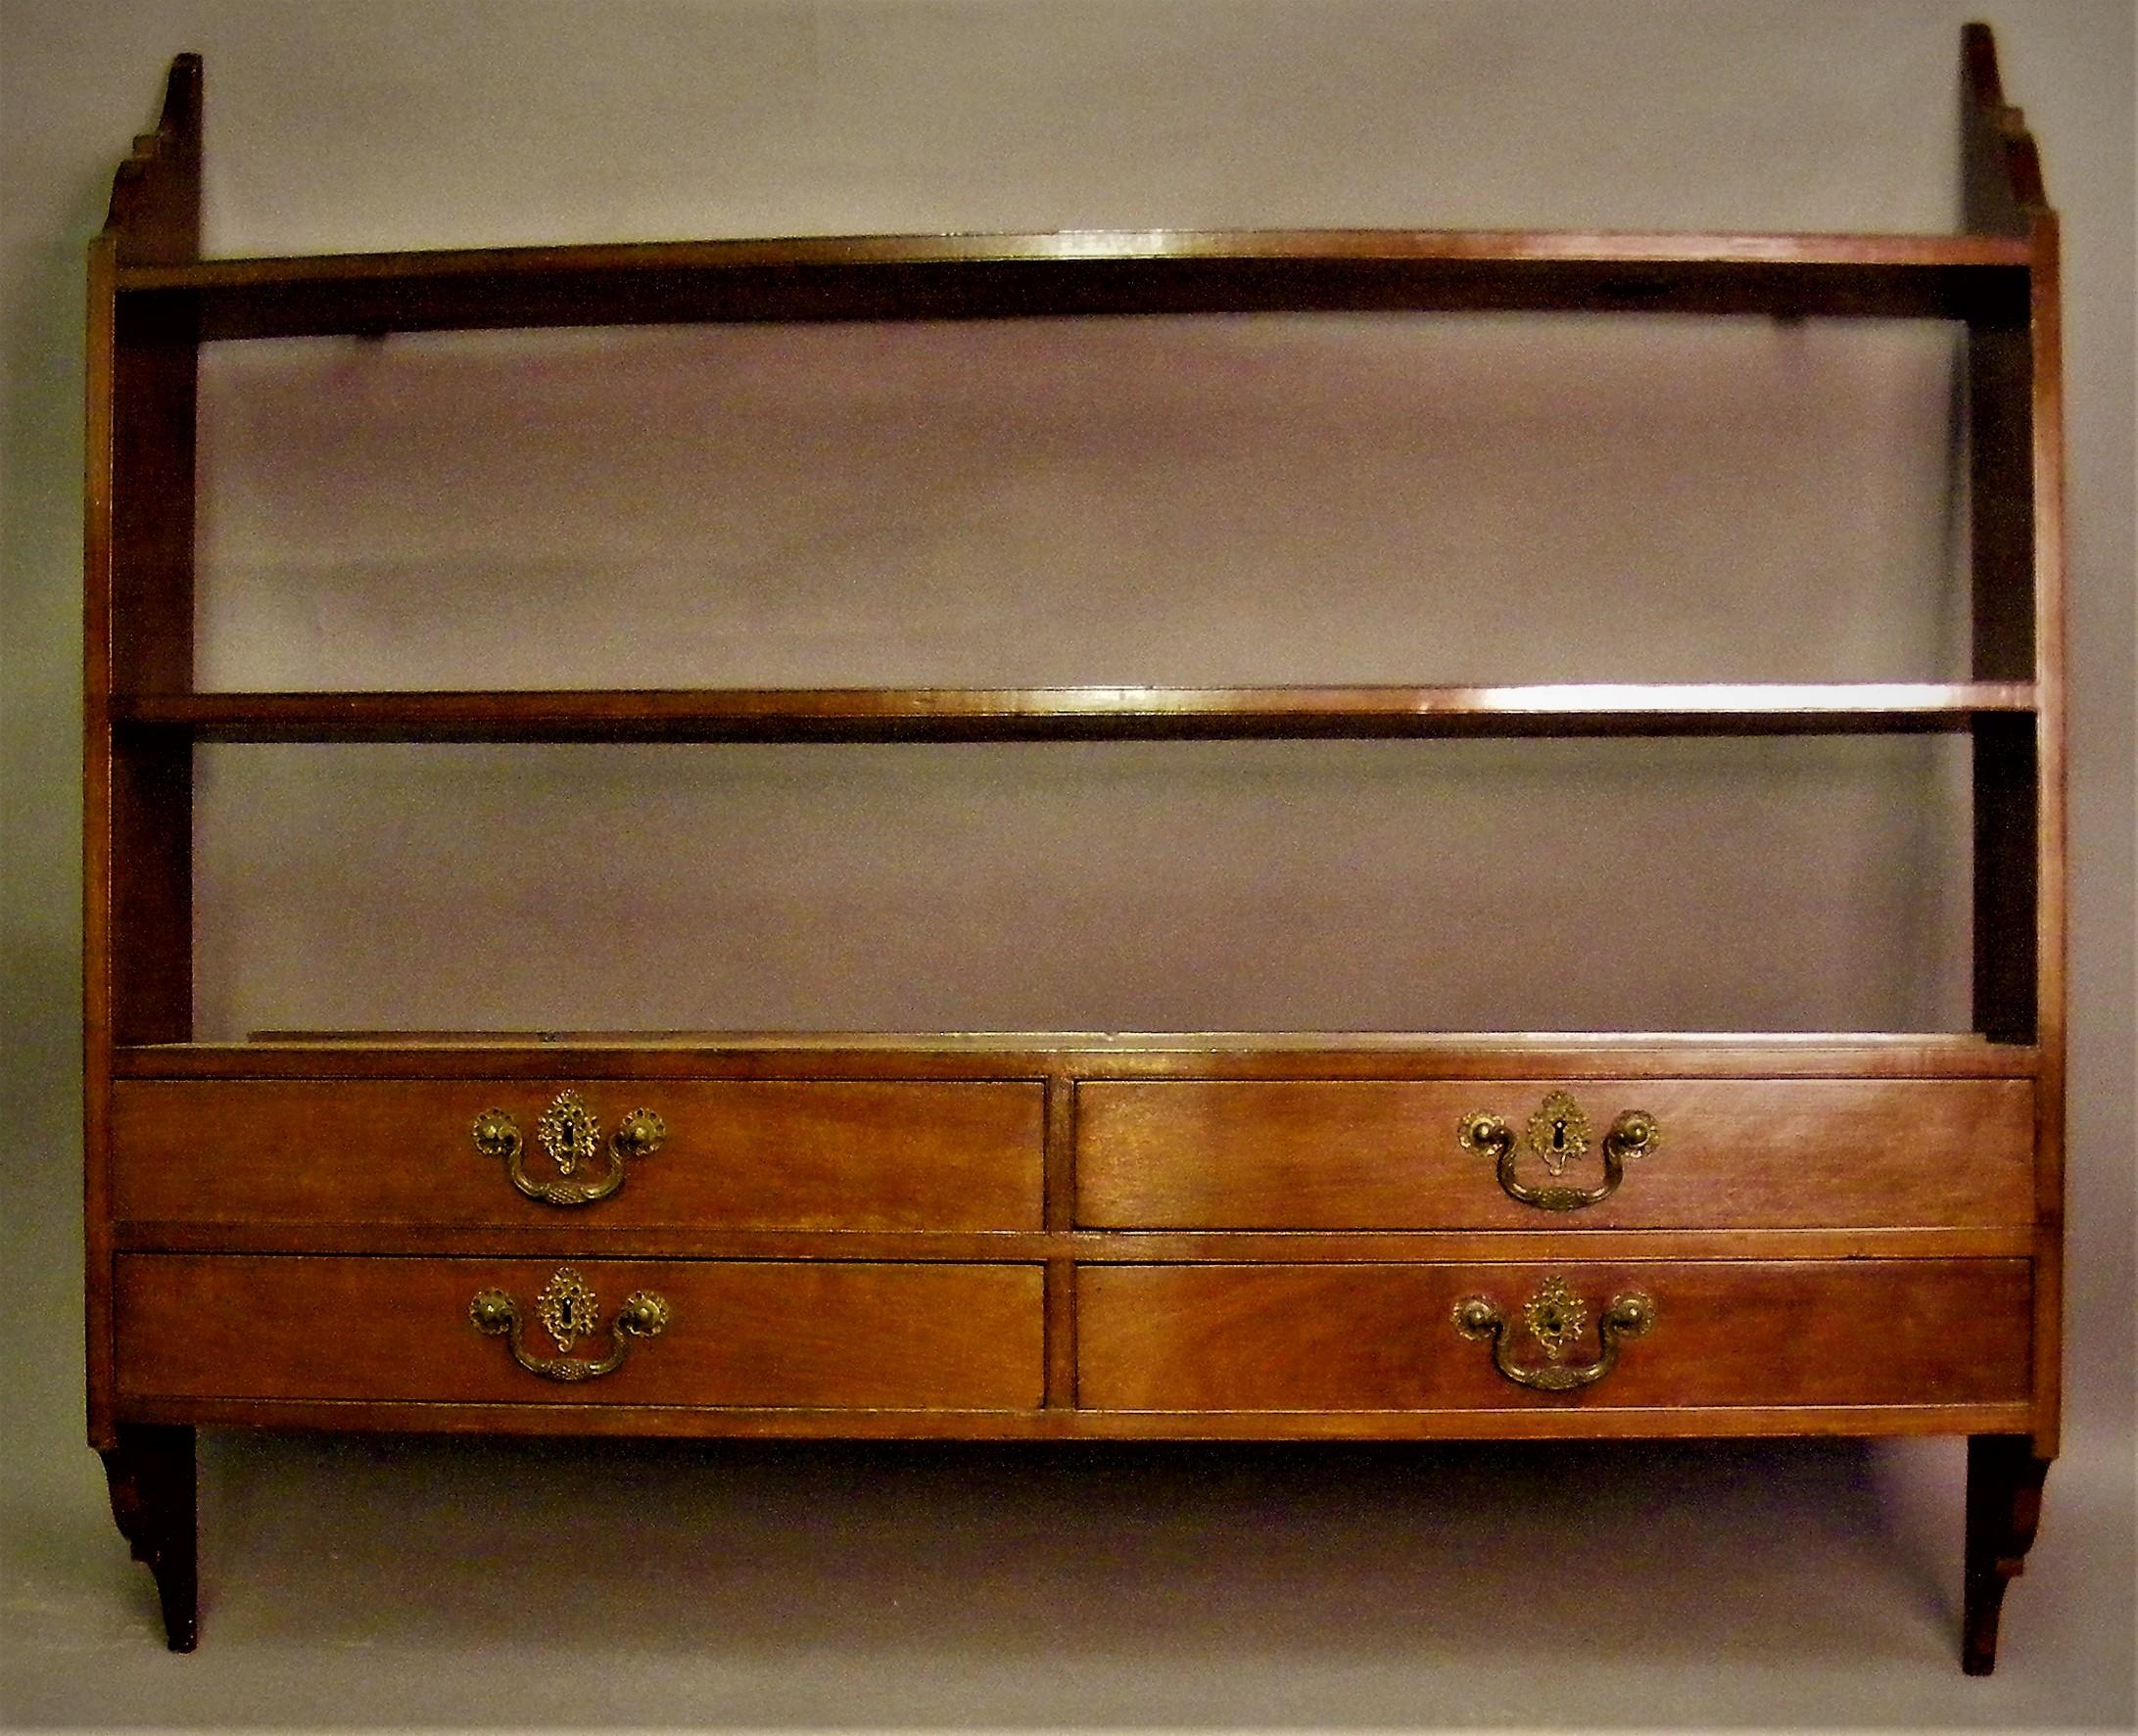 Hand-Crafted Chippendale Mahogany Shelves